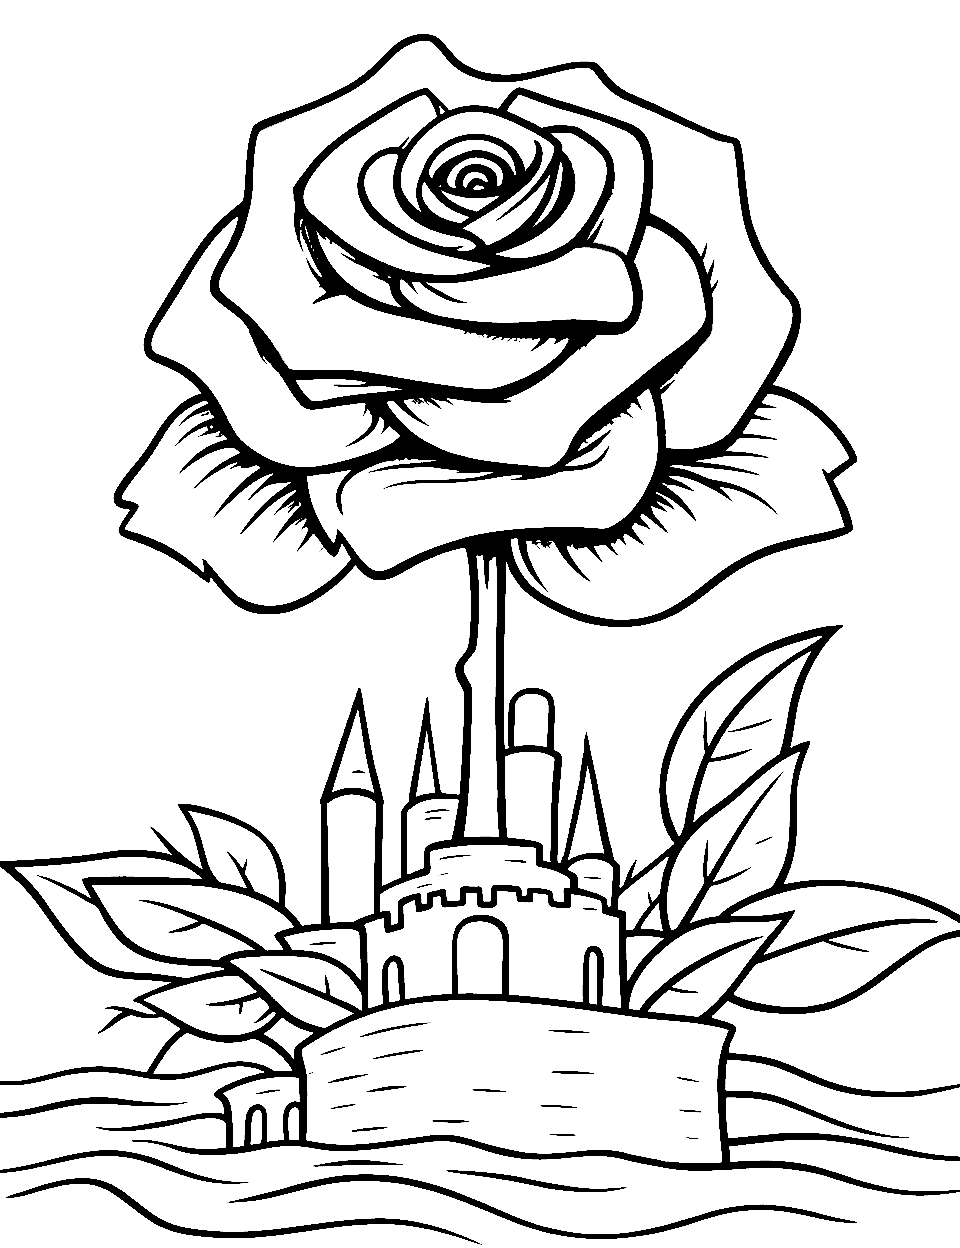 Free rose coloring pages for kids printables